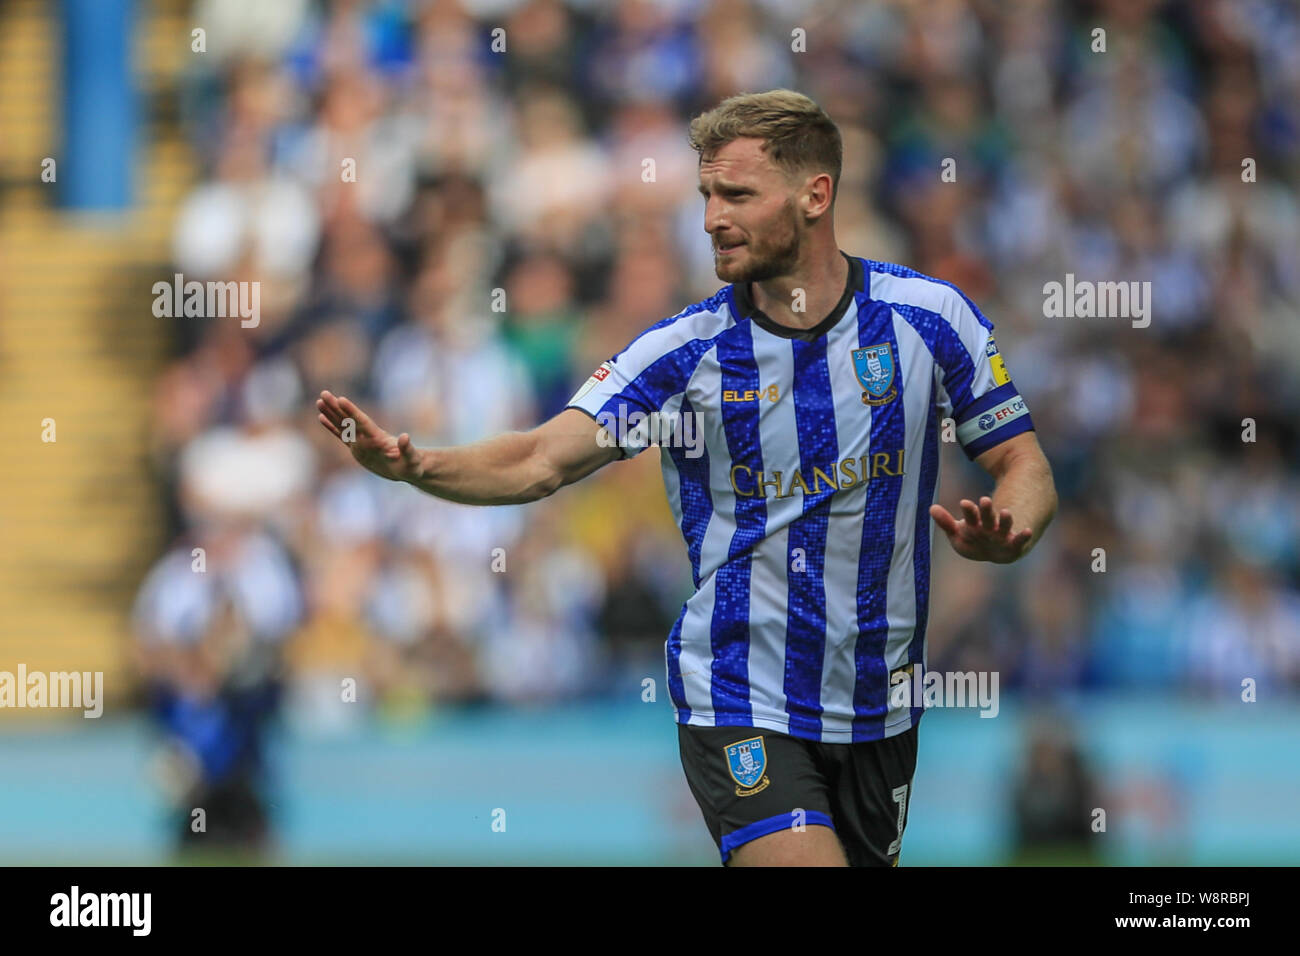 10th August 2019 , Hillsborough, Sheffield, England; Sky Bet Championship, Sheffield Wednesday vs Barnsley : Tom Lees (15) of Sheffield Wednesday gives his team instructions  Credit: Mark Cosgrove/News Images,  English Football League images are subject to DataCo Licence Stock Photo